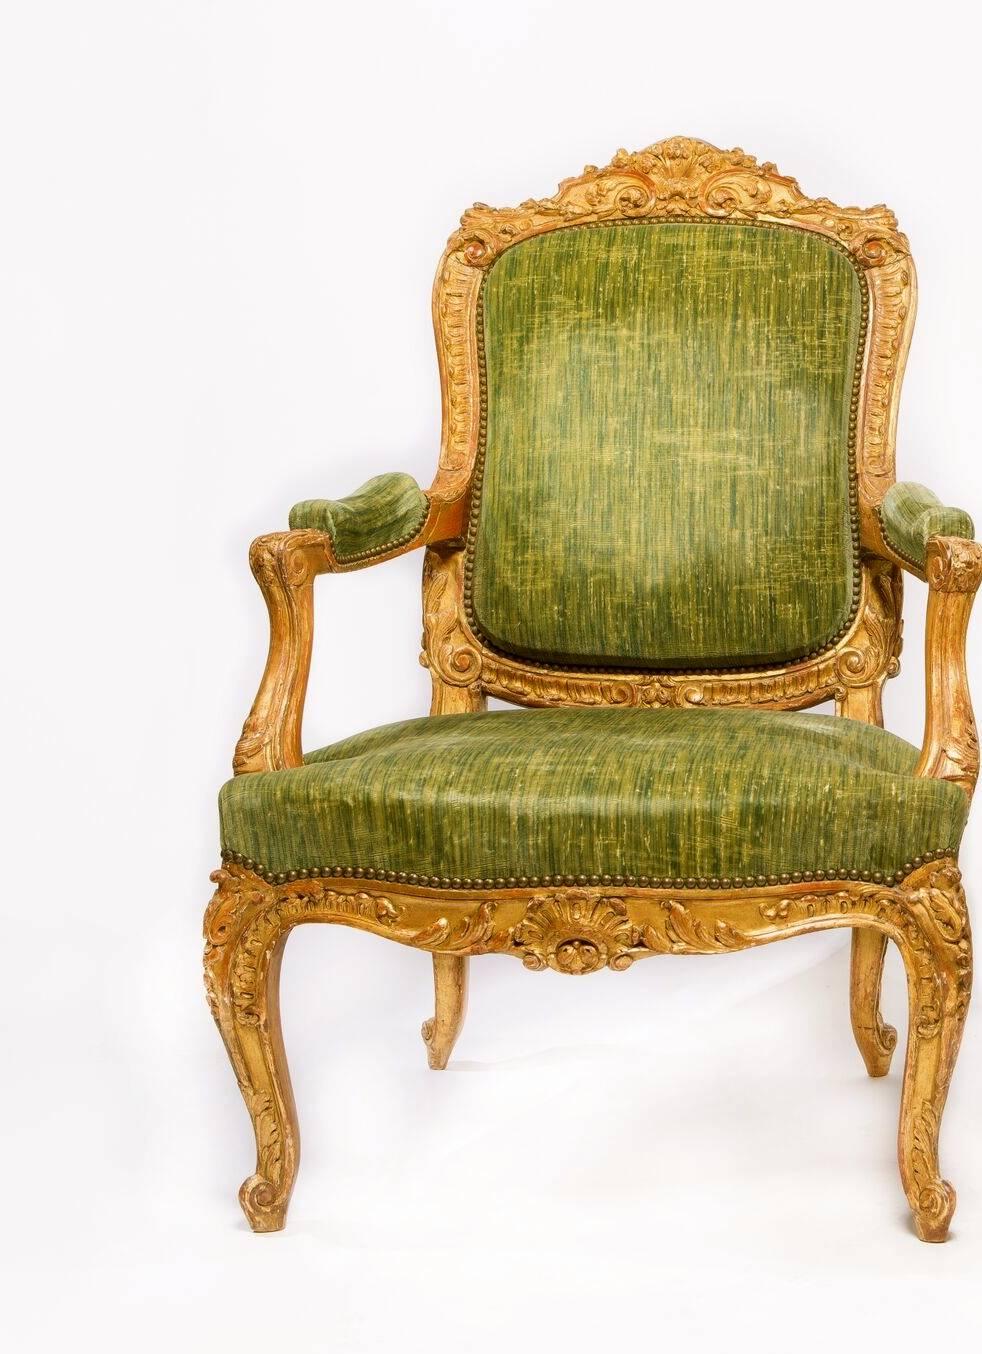 A very fine pair of large Louis XV style gilt-wood Fauteuils En Cabriolet of richly carved details with a cartouche-shaped leaf-carved backrest, the serpentine top rail center by a shell and foliate motif, the padded armrest raised on voluted